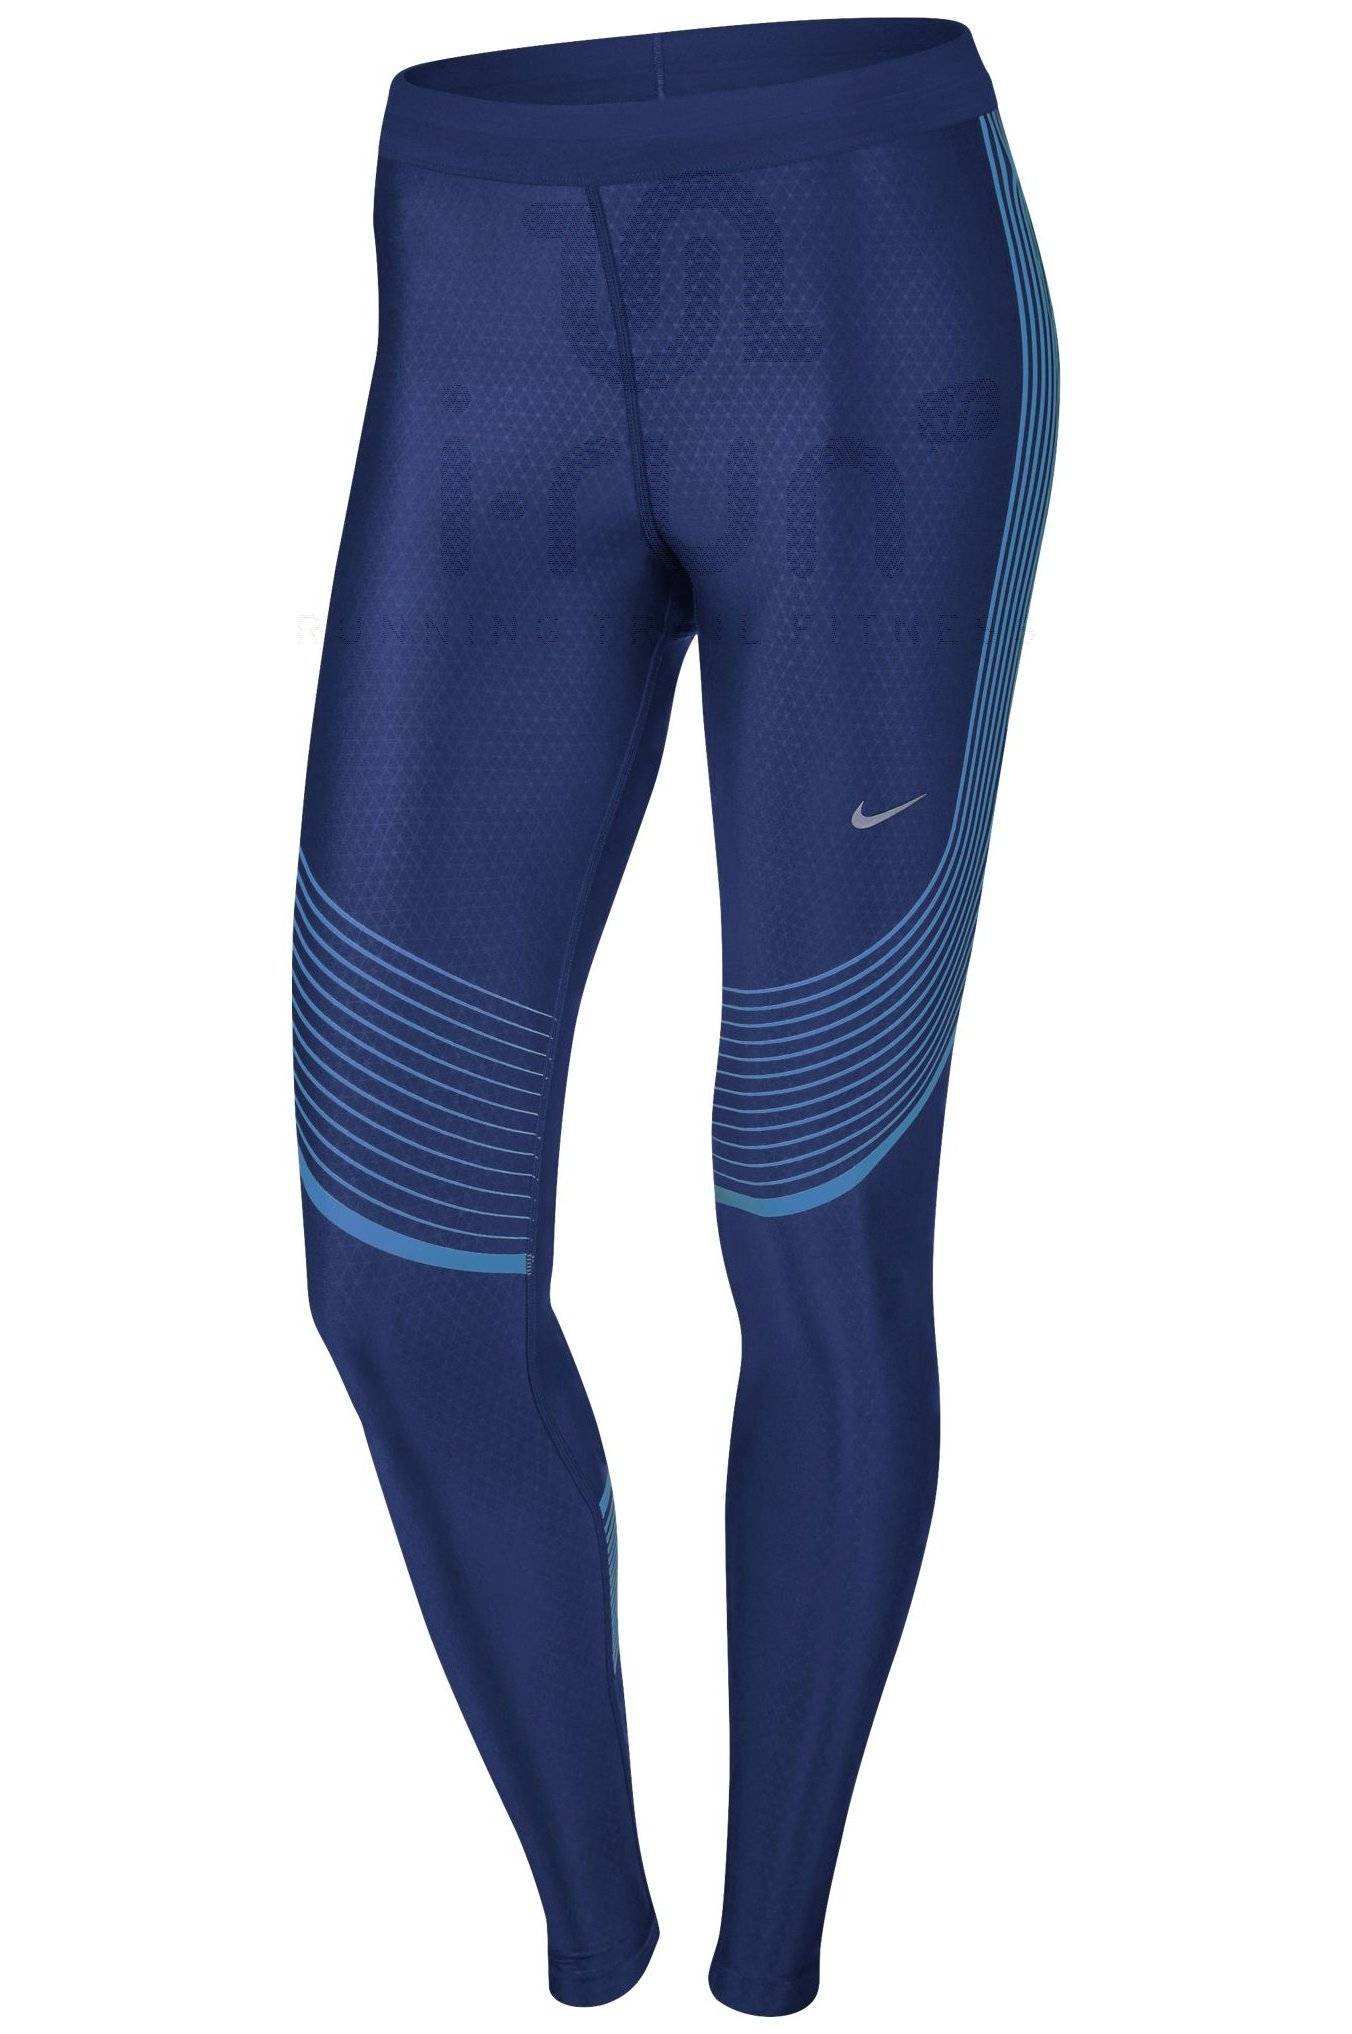 Nike Collant Power Speed M homme pas cher